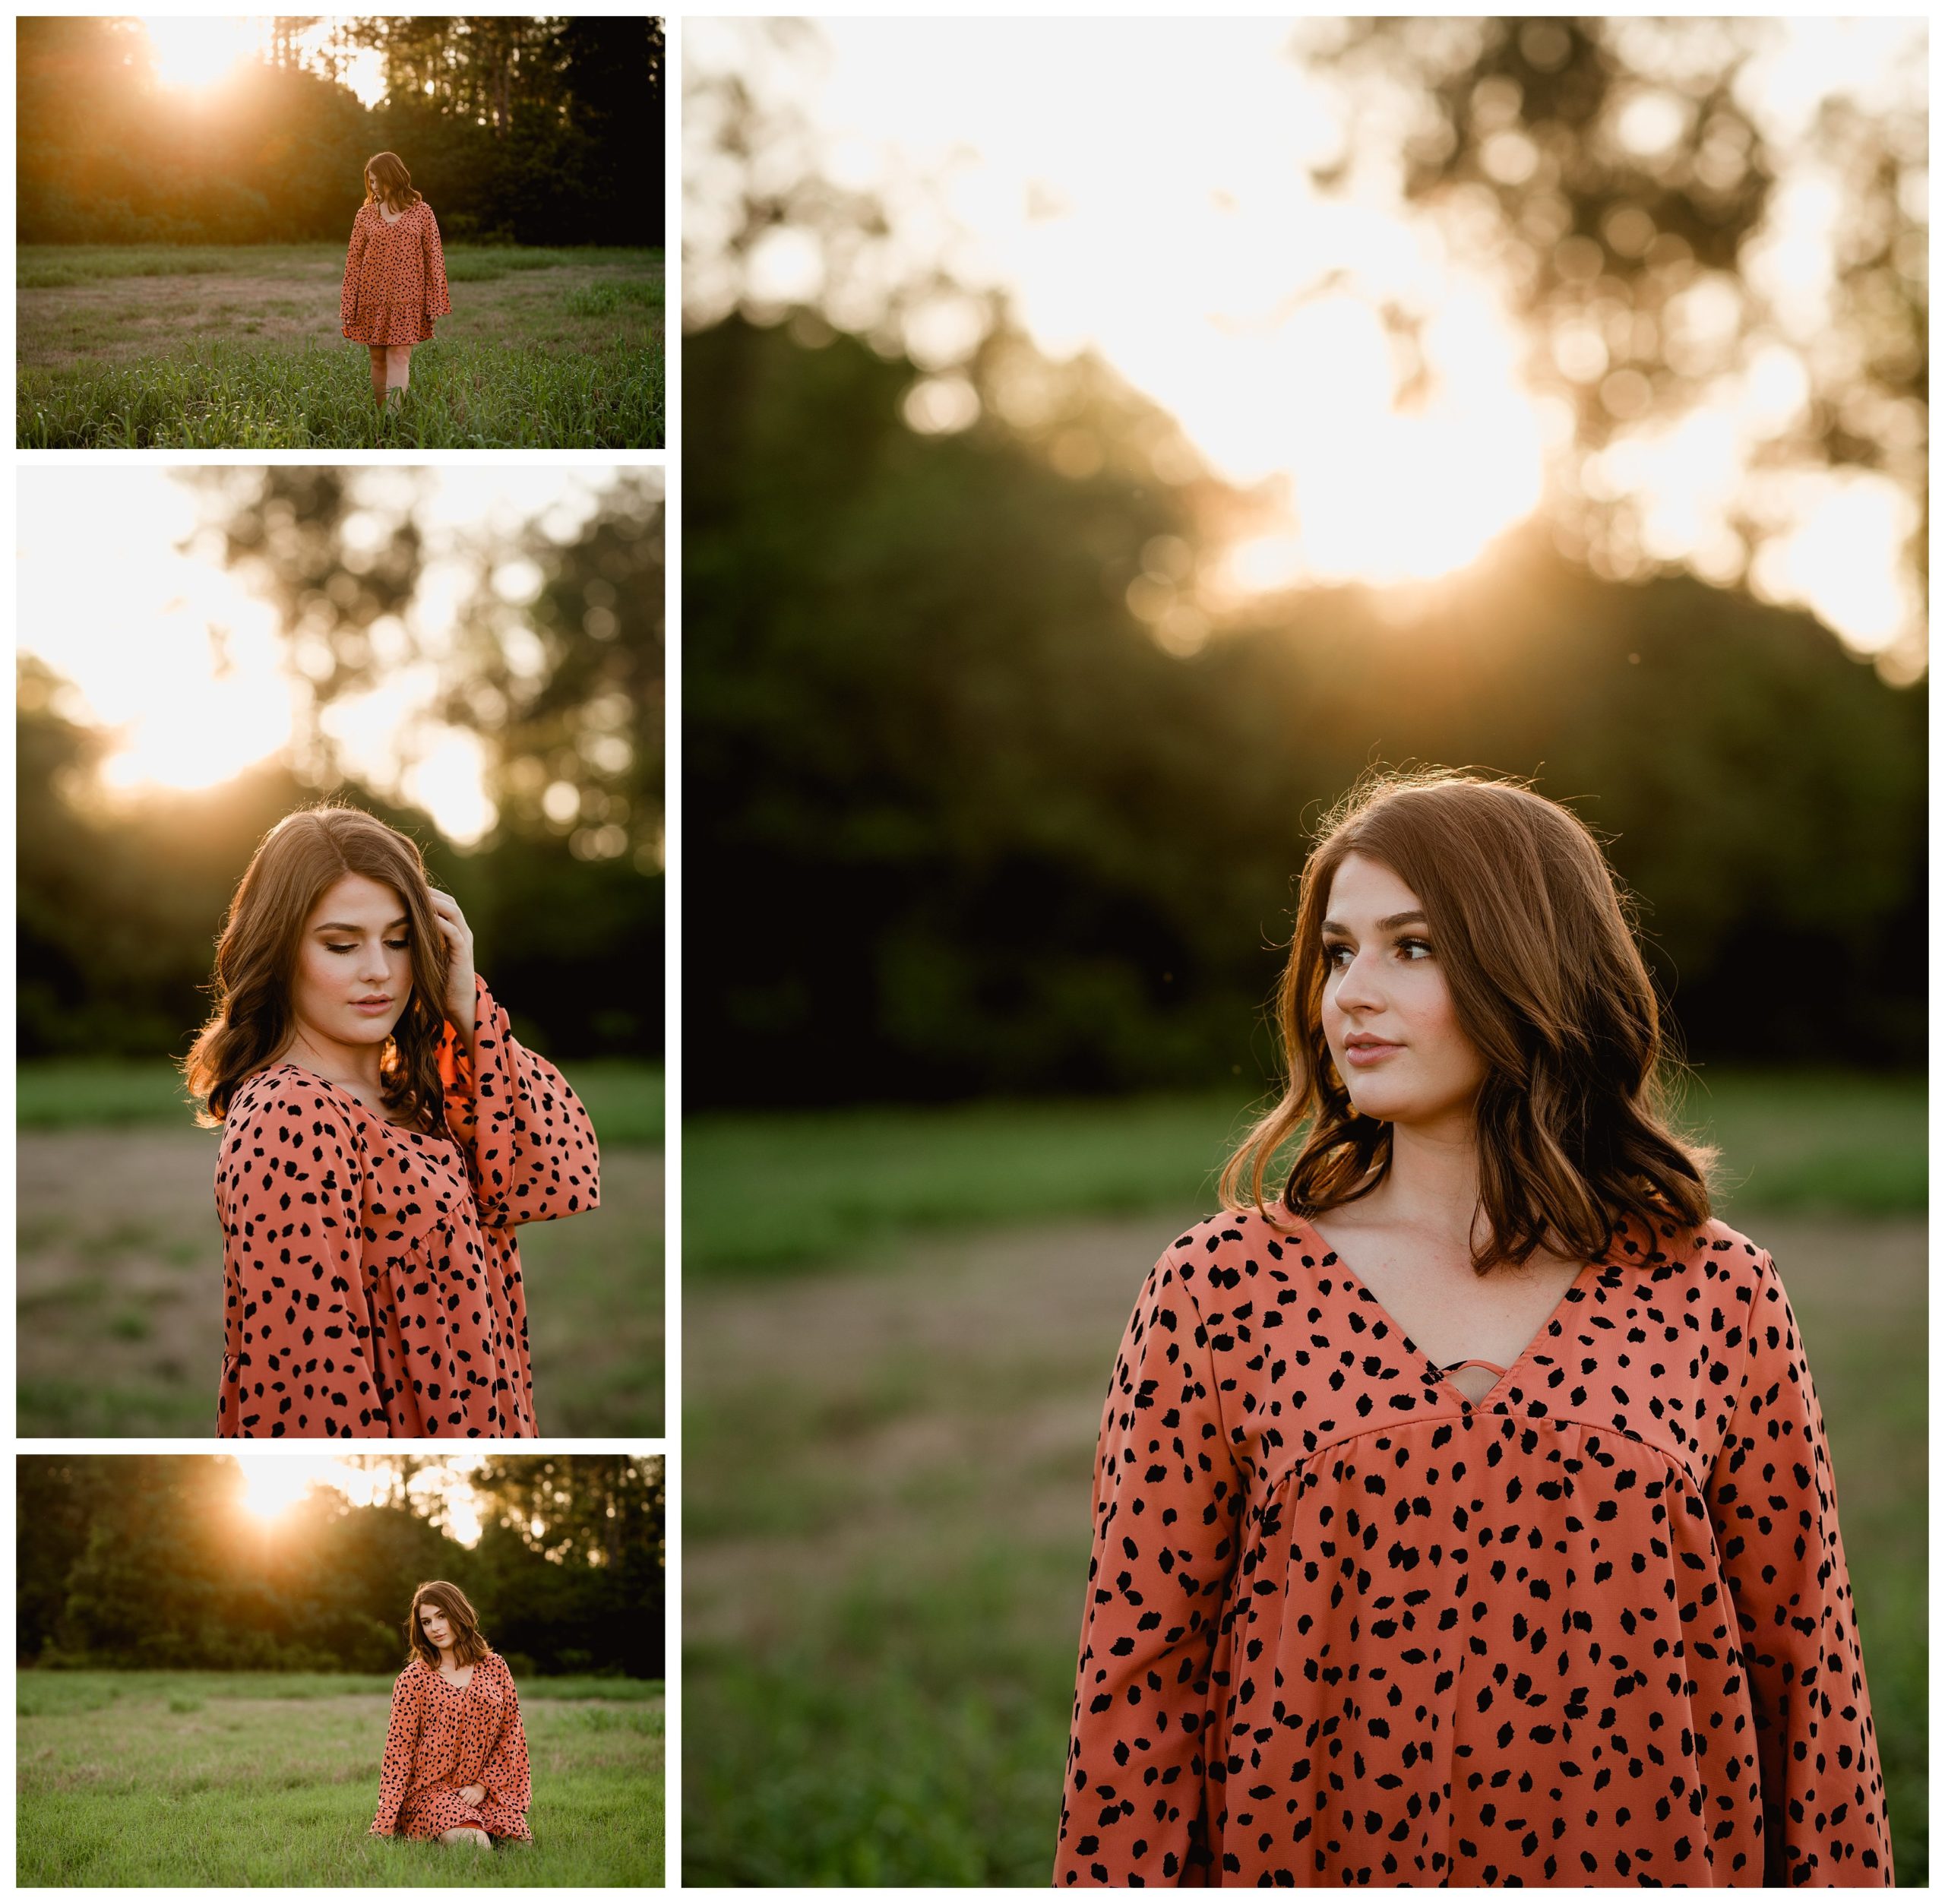 Photoshoot ideas for girls during the golden hour